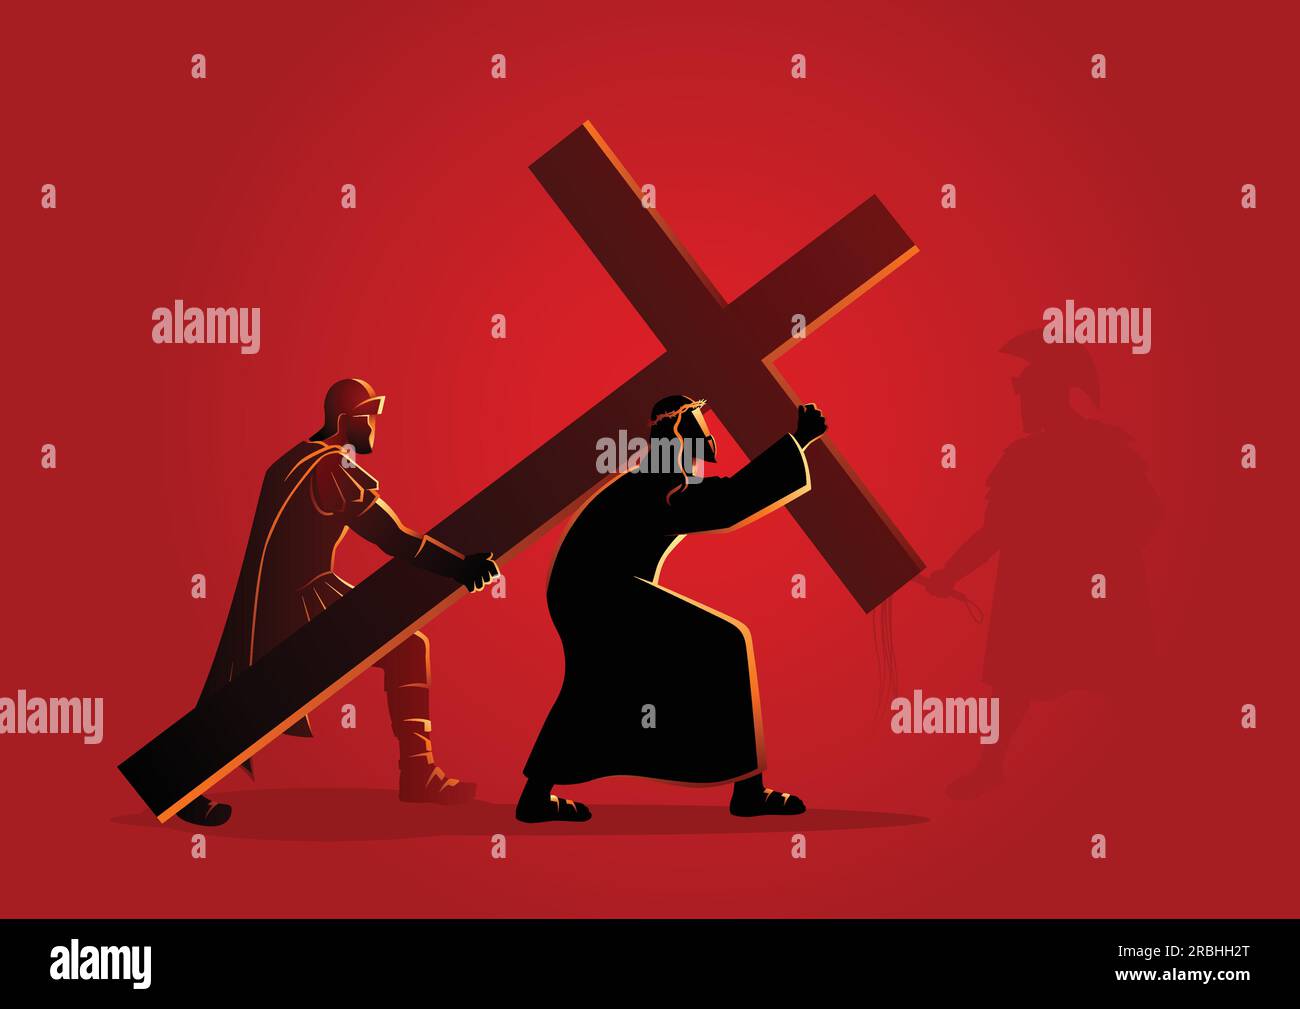 Biblical vector illustration series. Way of the Cross or Stations of